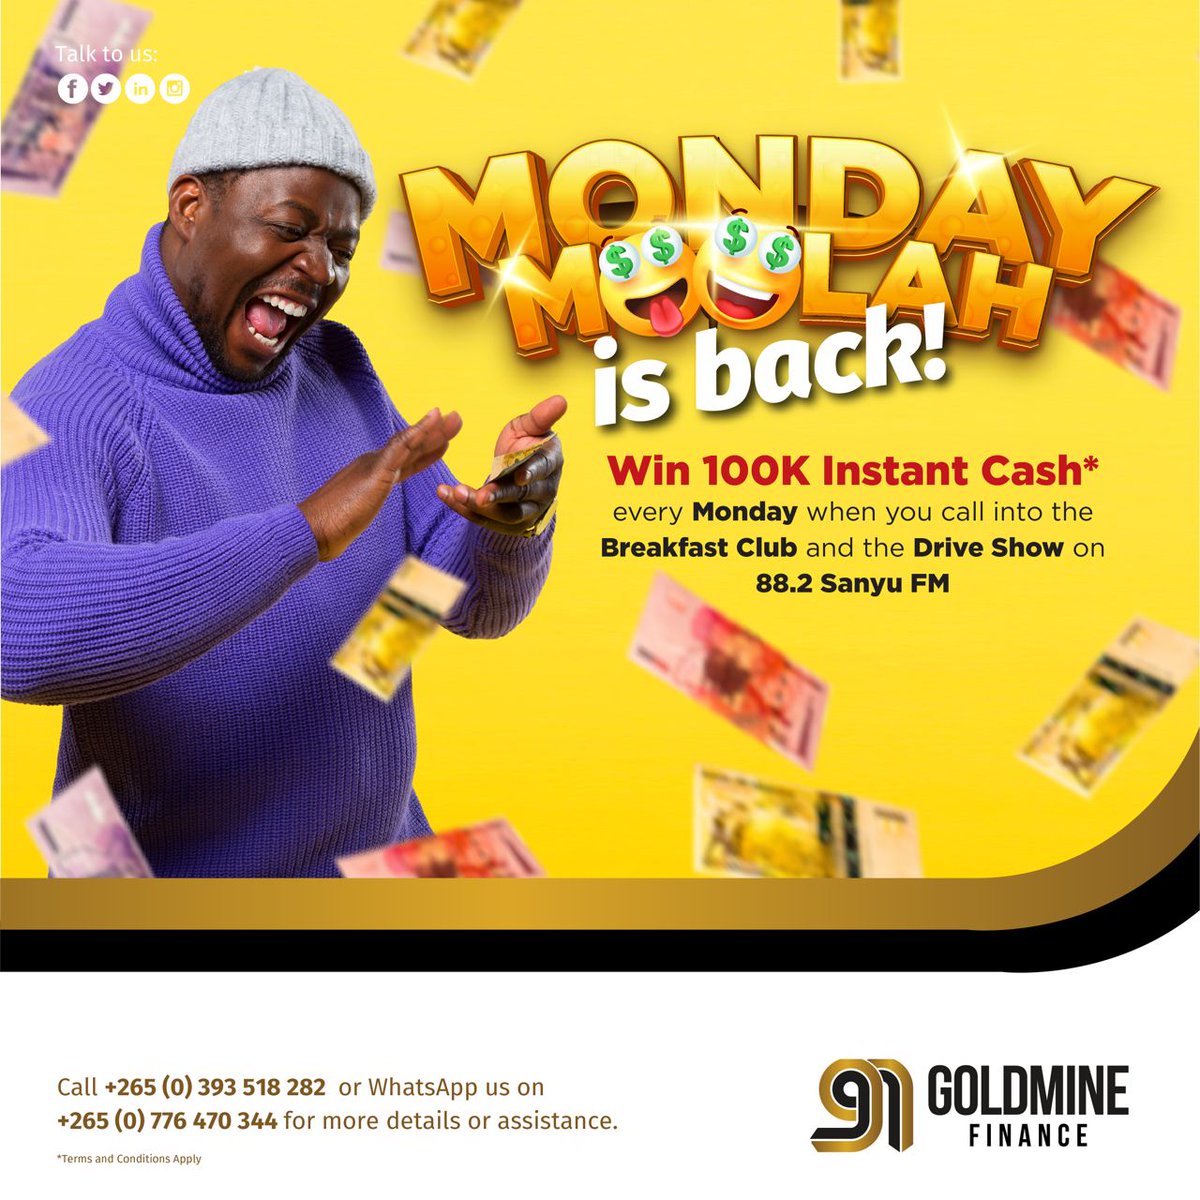 Fredrick Semyalo & Denis Ssebugwawo- this week’s winners of #MondayMoolah in conjunction with Sanyu FM.

Stand a chance to win some 💰 by tuning into @882sanyufm every Monday on the breakfast & evening drive show

#GoldmineFinance #SmartLoansSmartResults #MayMayhem2023 #MayMayhem